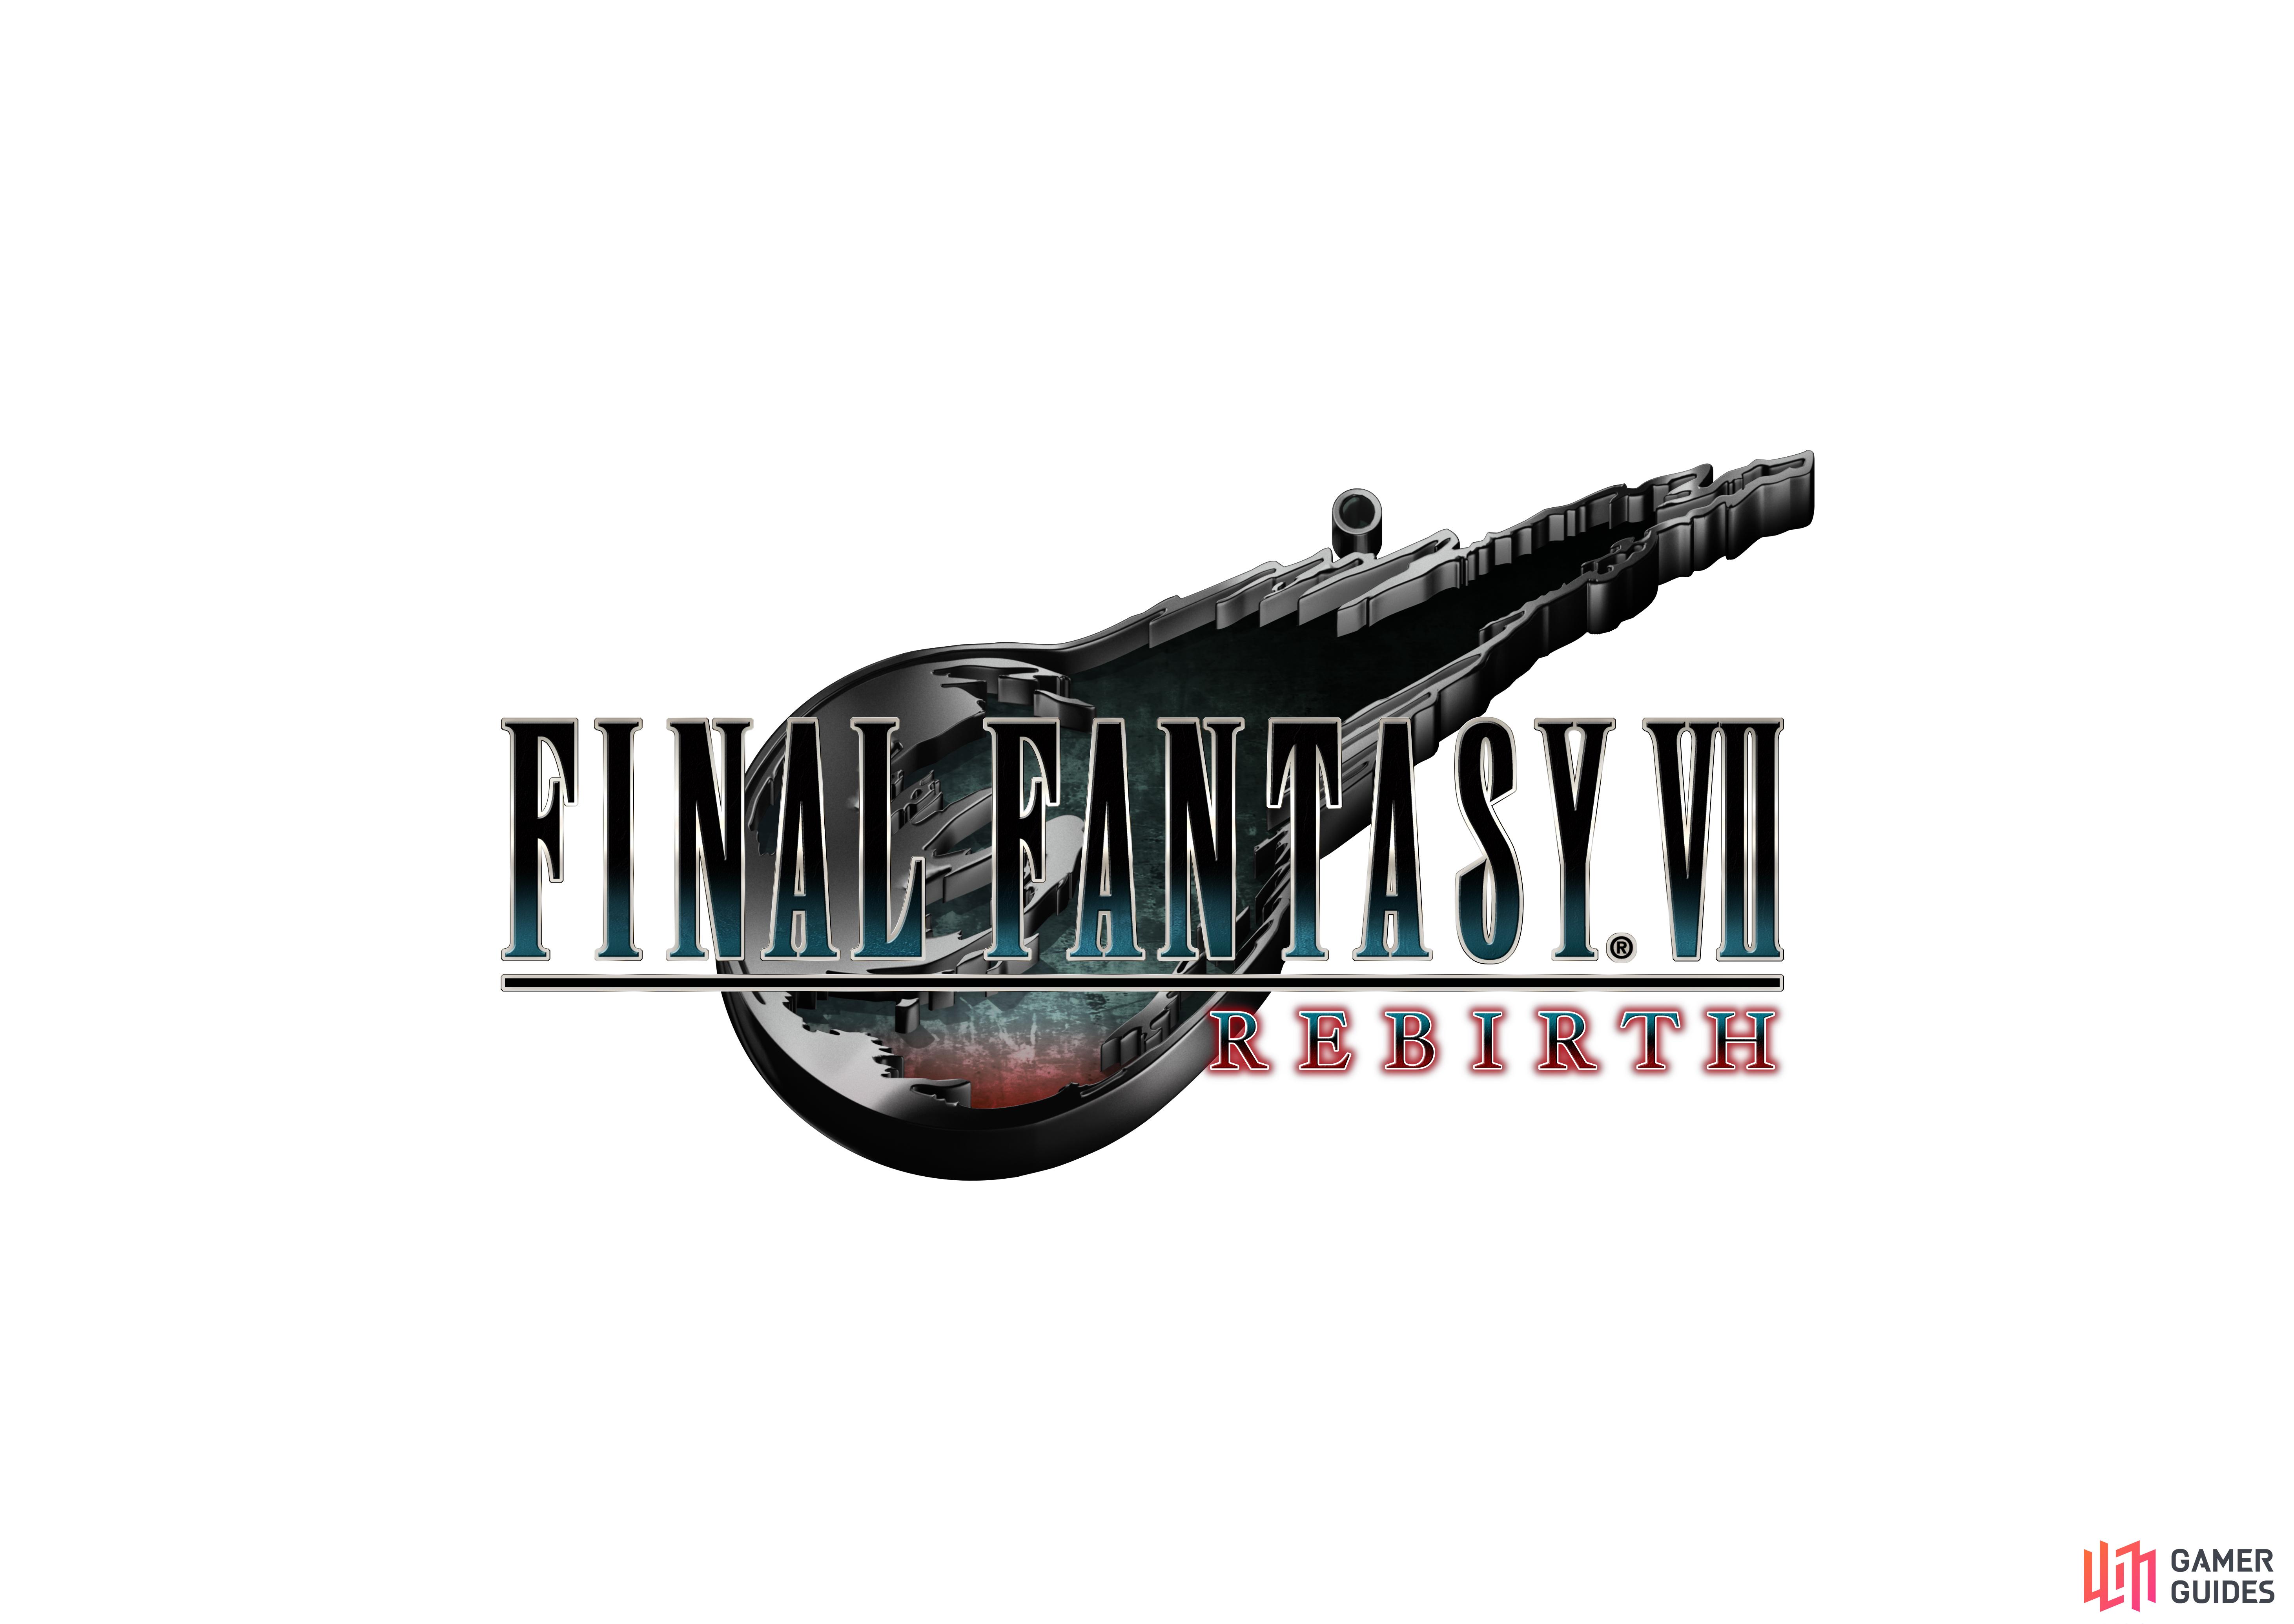 Final Fantasy VII Rebirth is the title of the second part of the remake trilogy.